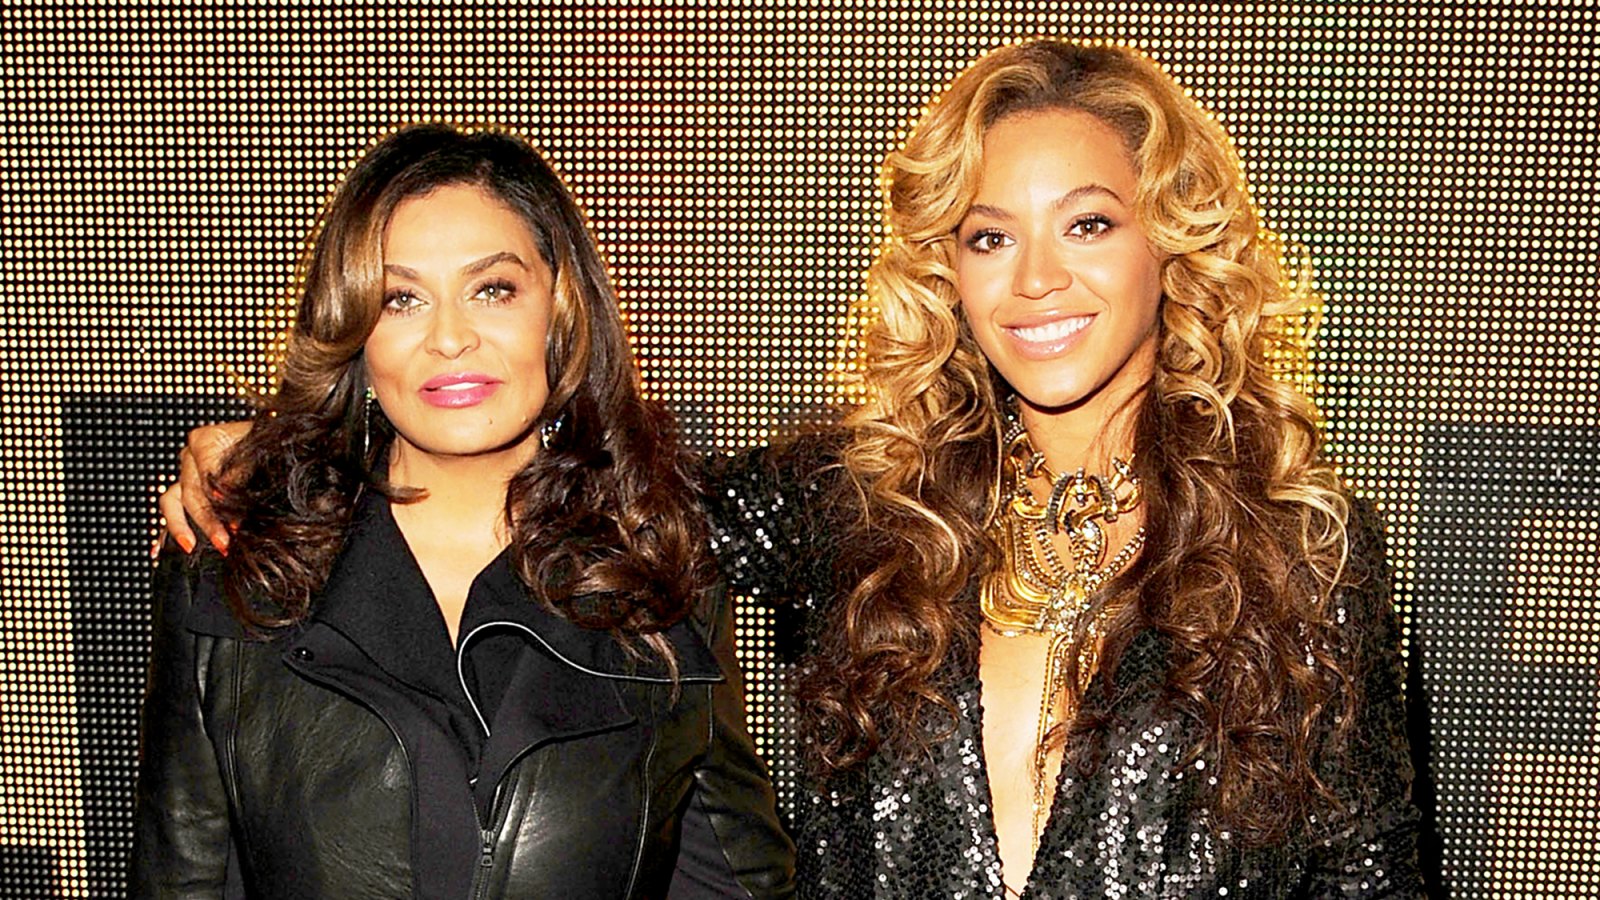 Tina Lawson and Beyonce attend the 2011 Launch Of House Of Dereon By Beyonce And Tina Knowles at Selfridges in London, England.